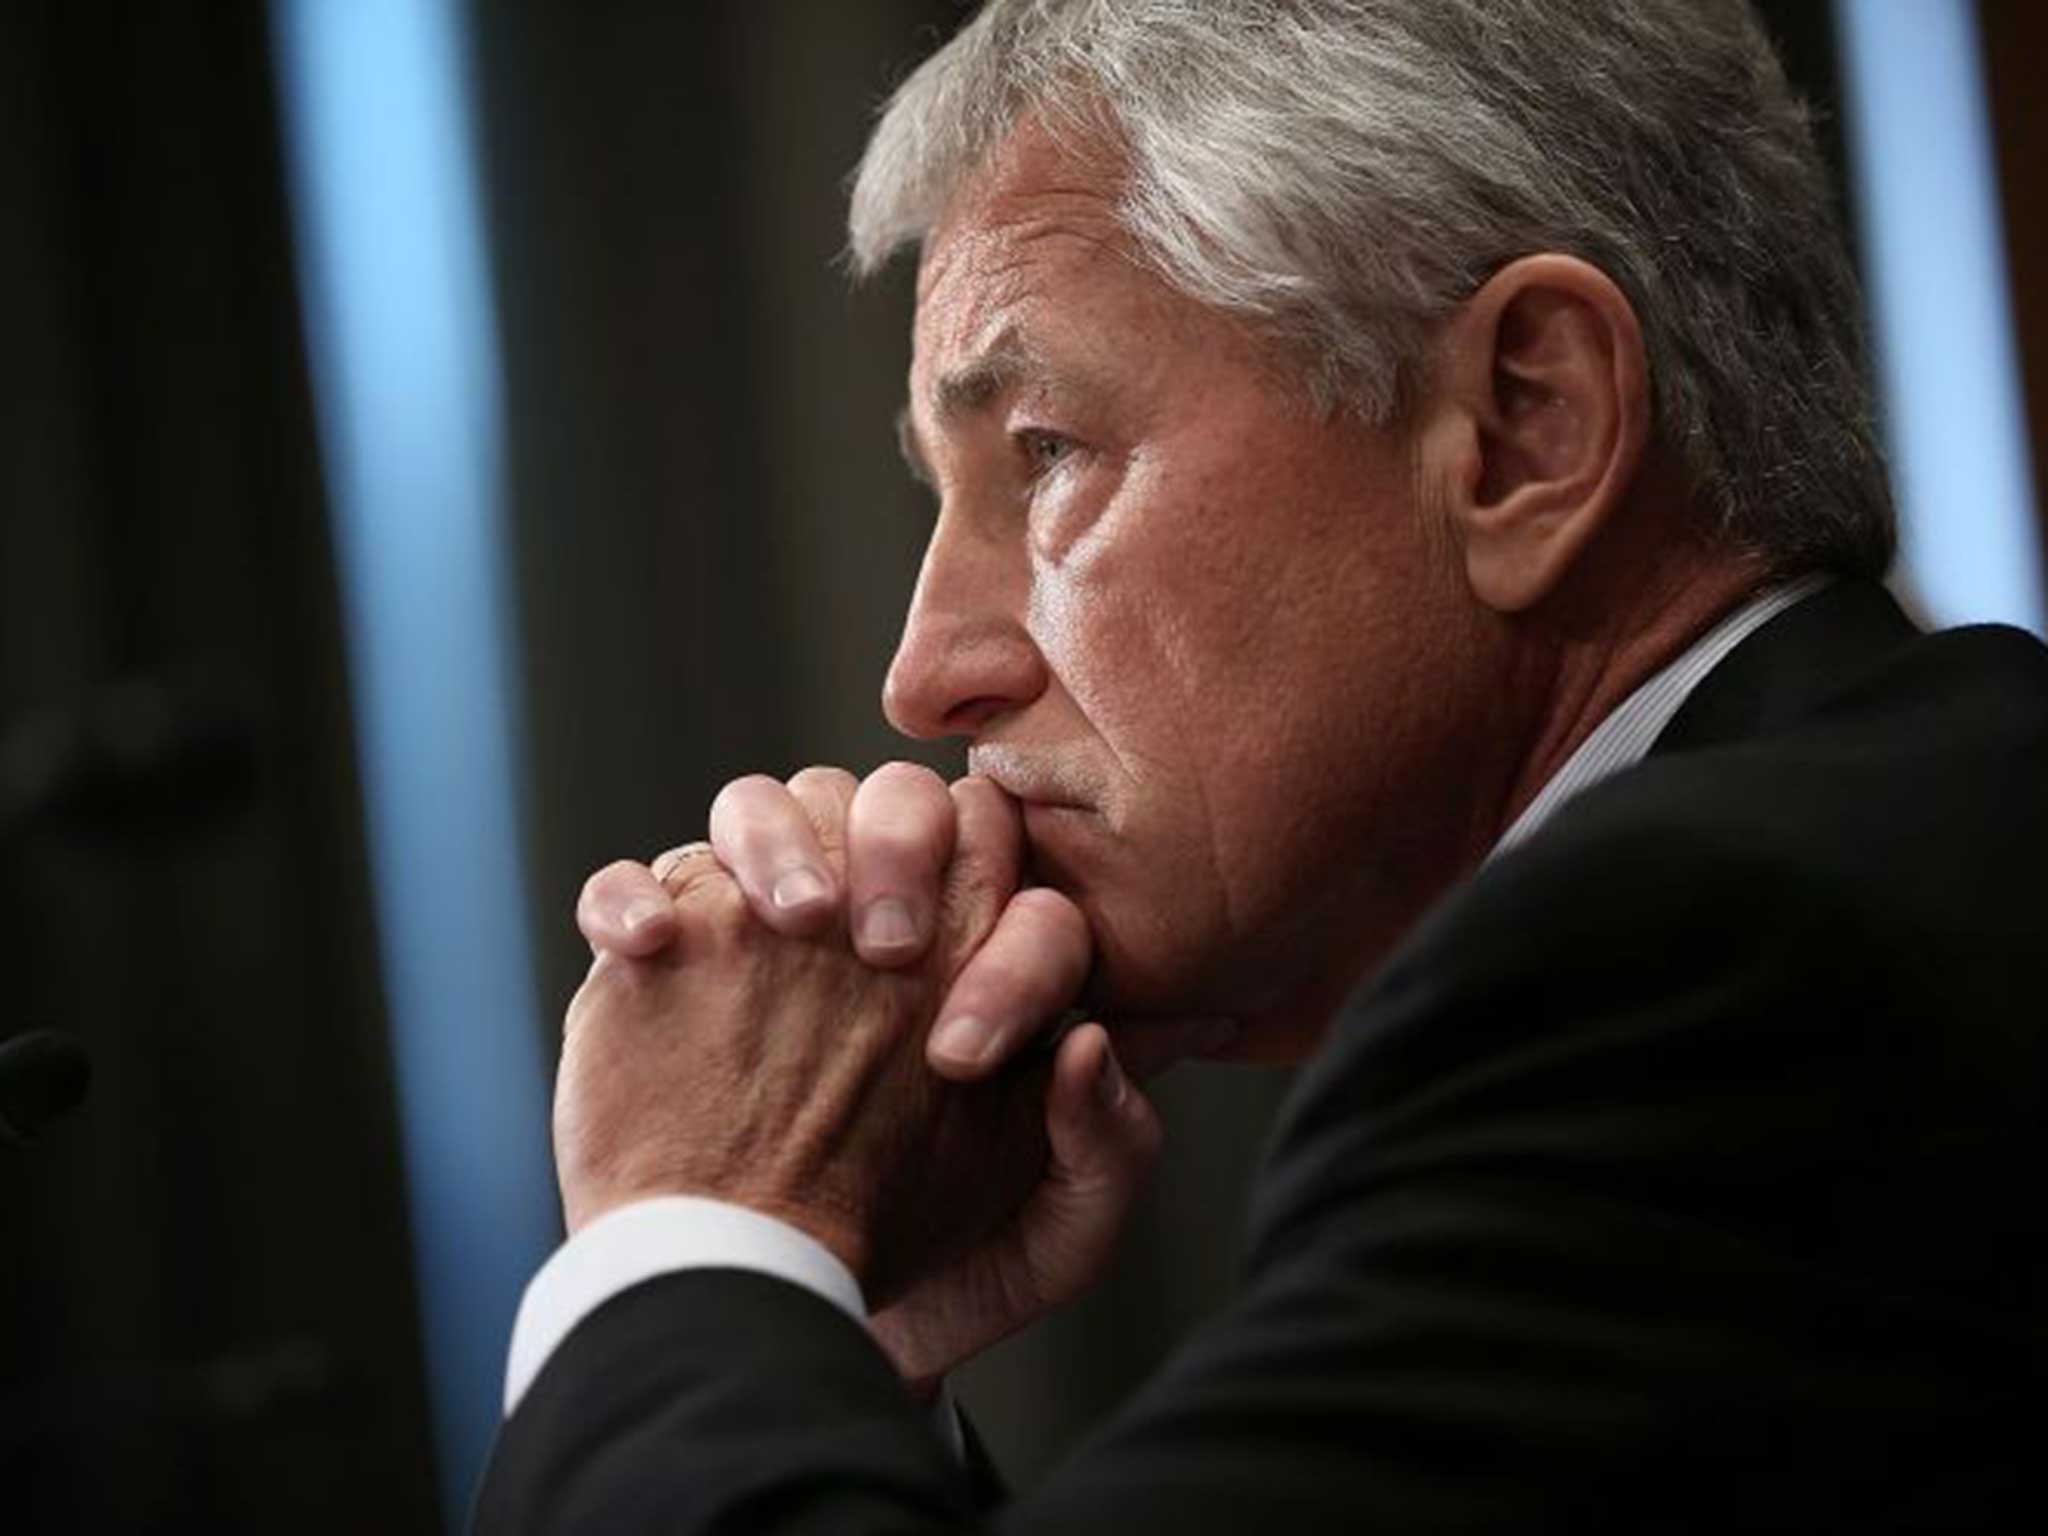 Chuck Hagel is stepping down from his post as United States Defence Secretary